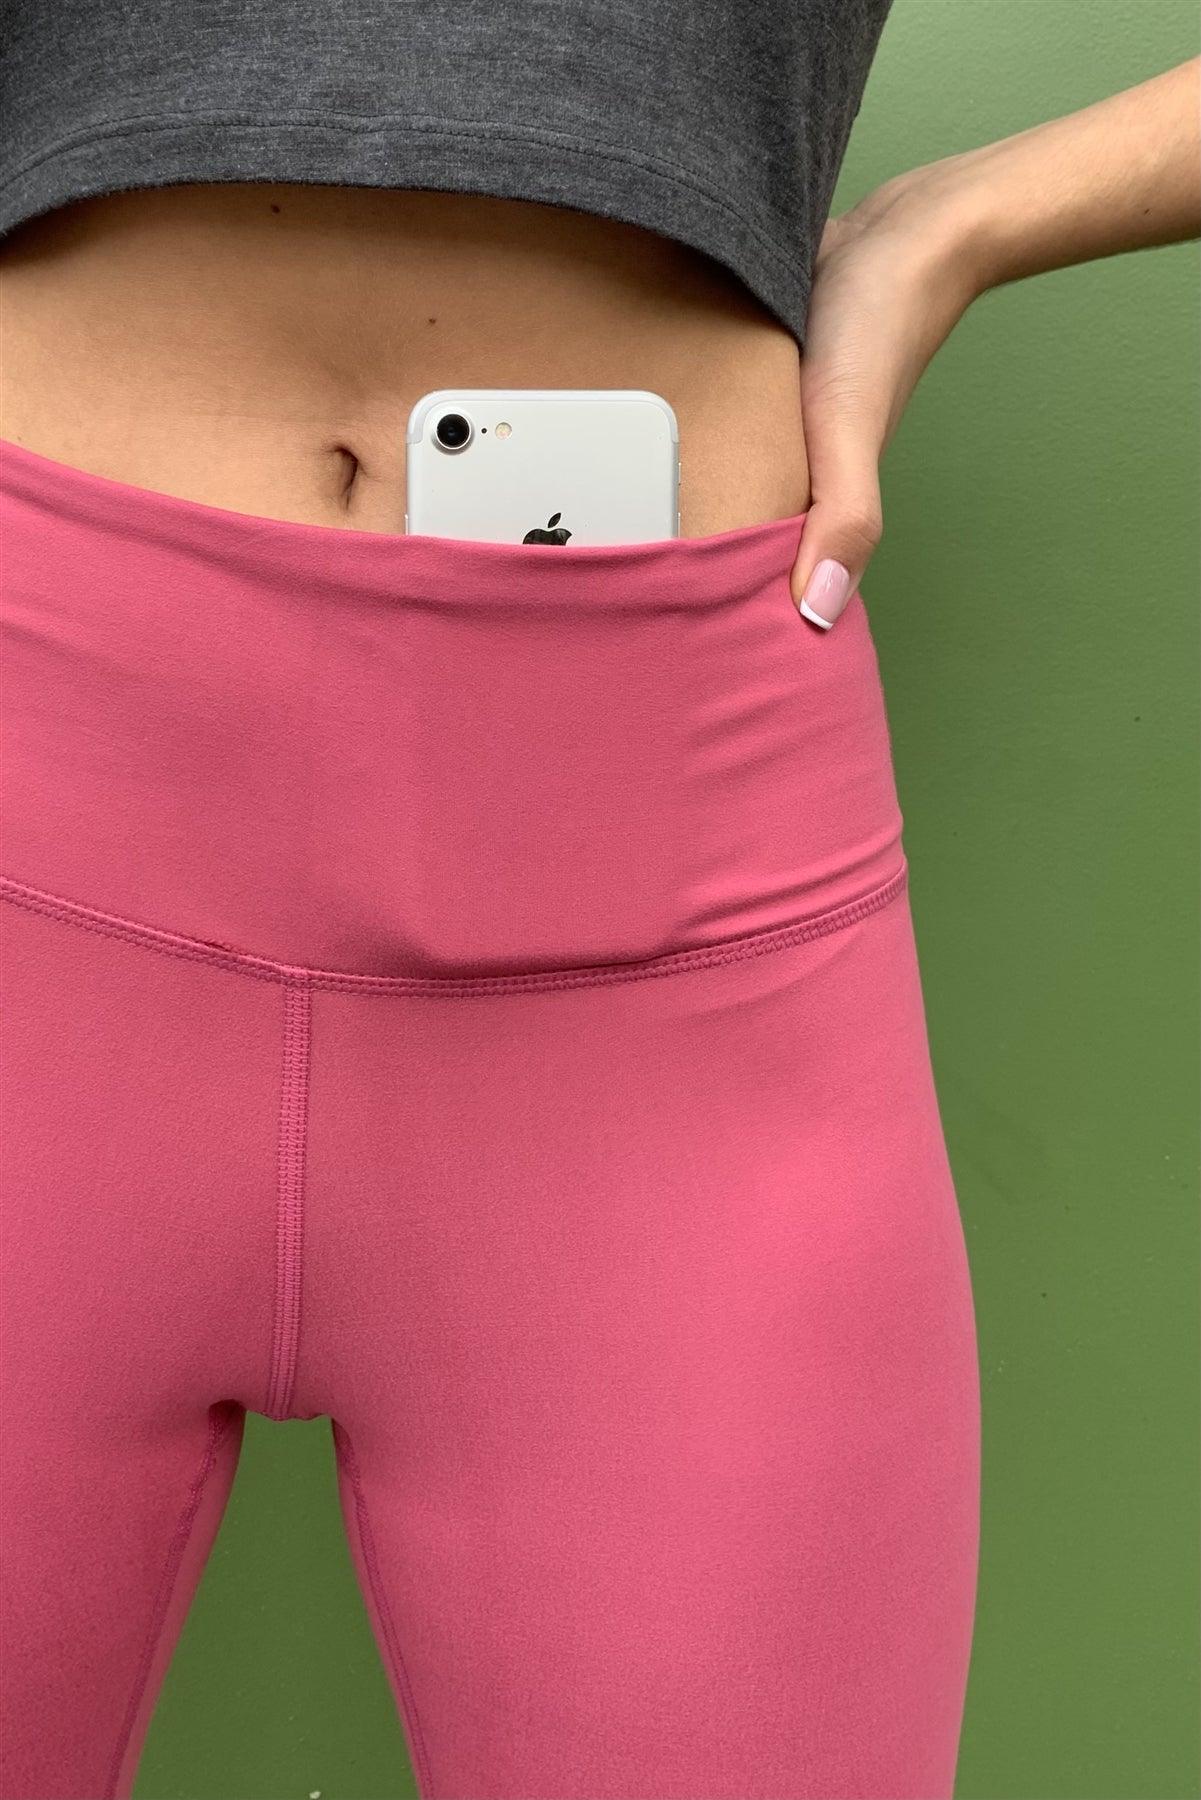 Coral Pink Mid-Rise Inner Waist Pocket Detail Tight Fit Soft Yoga & Work Out Legging Pants /1-2-2-1